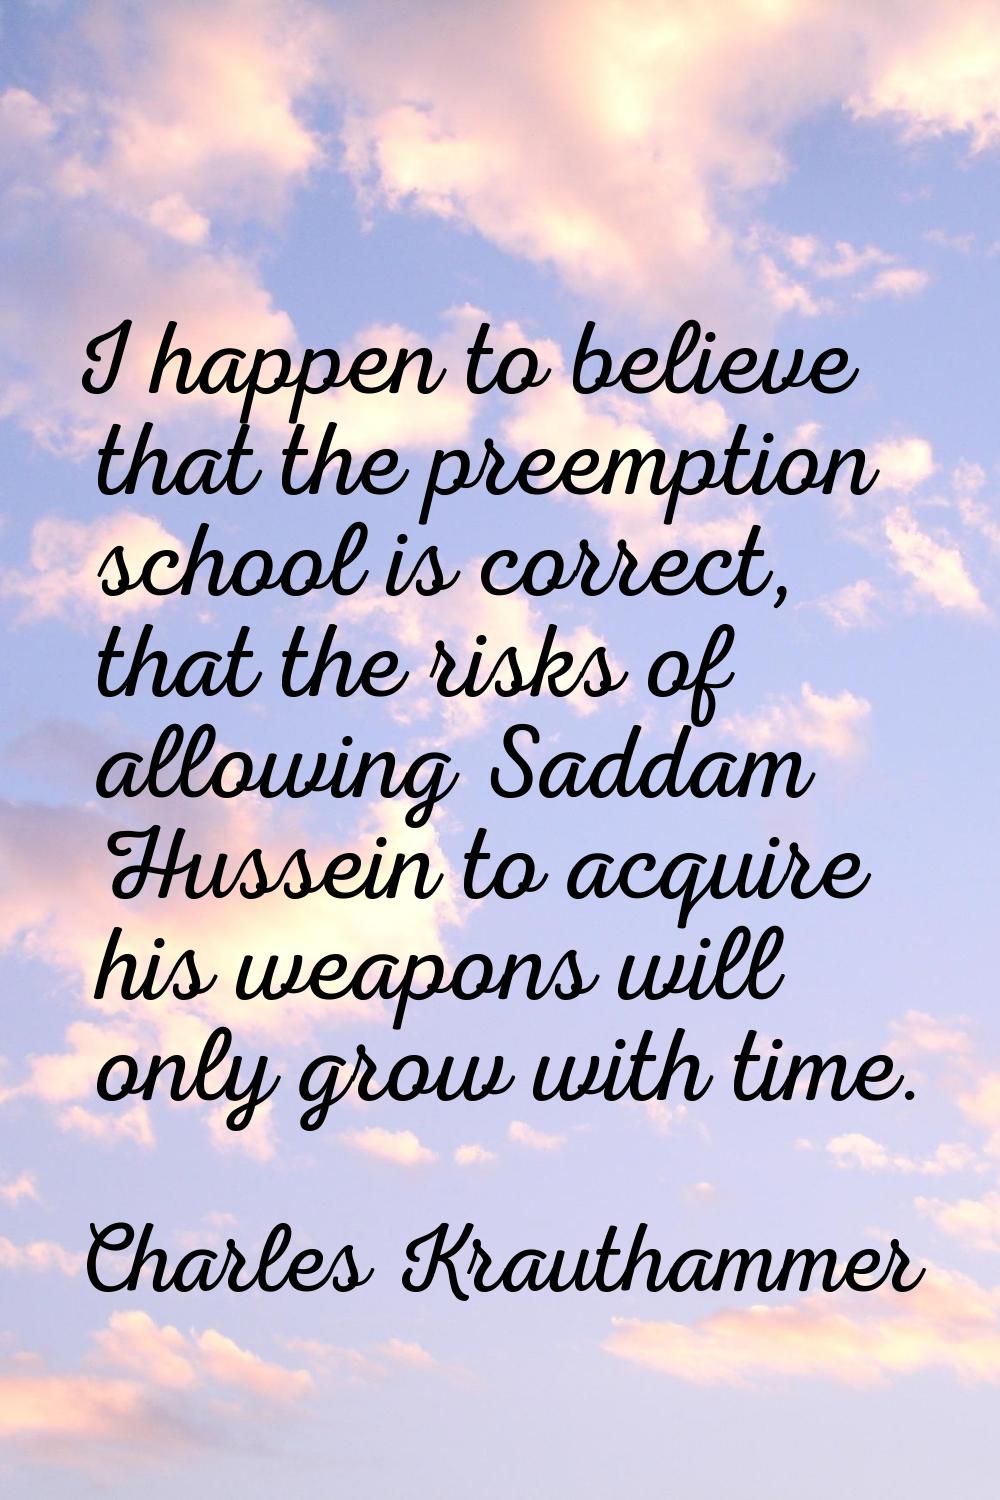 I happen to believe that the preemption school is correct, that the risks of allowing Saddam Hussei